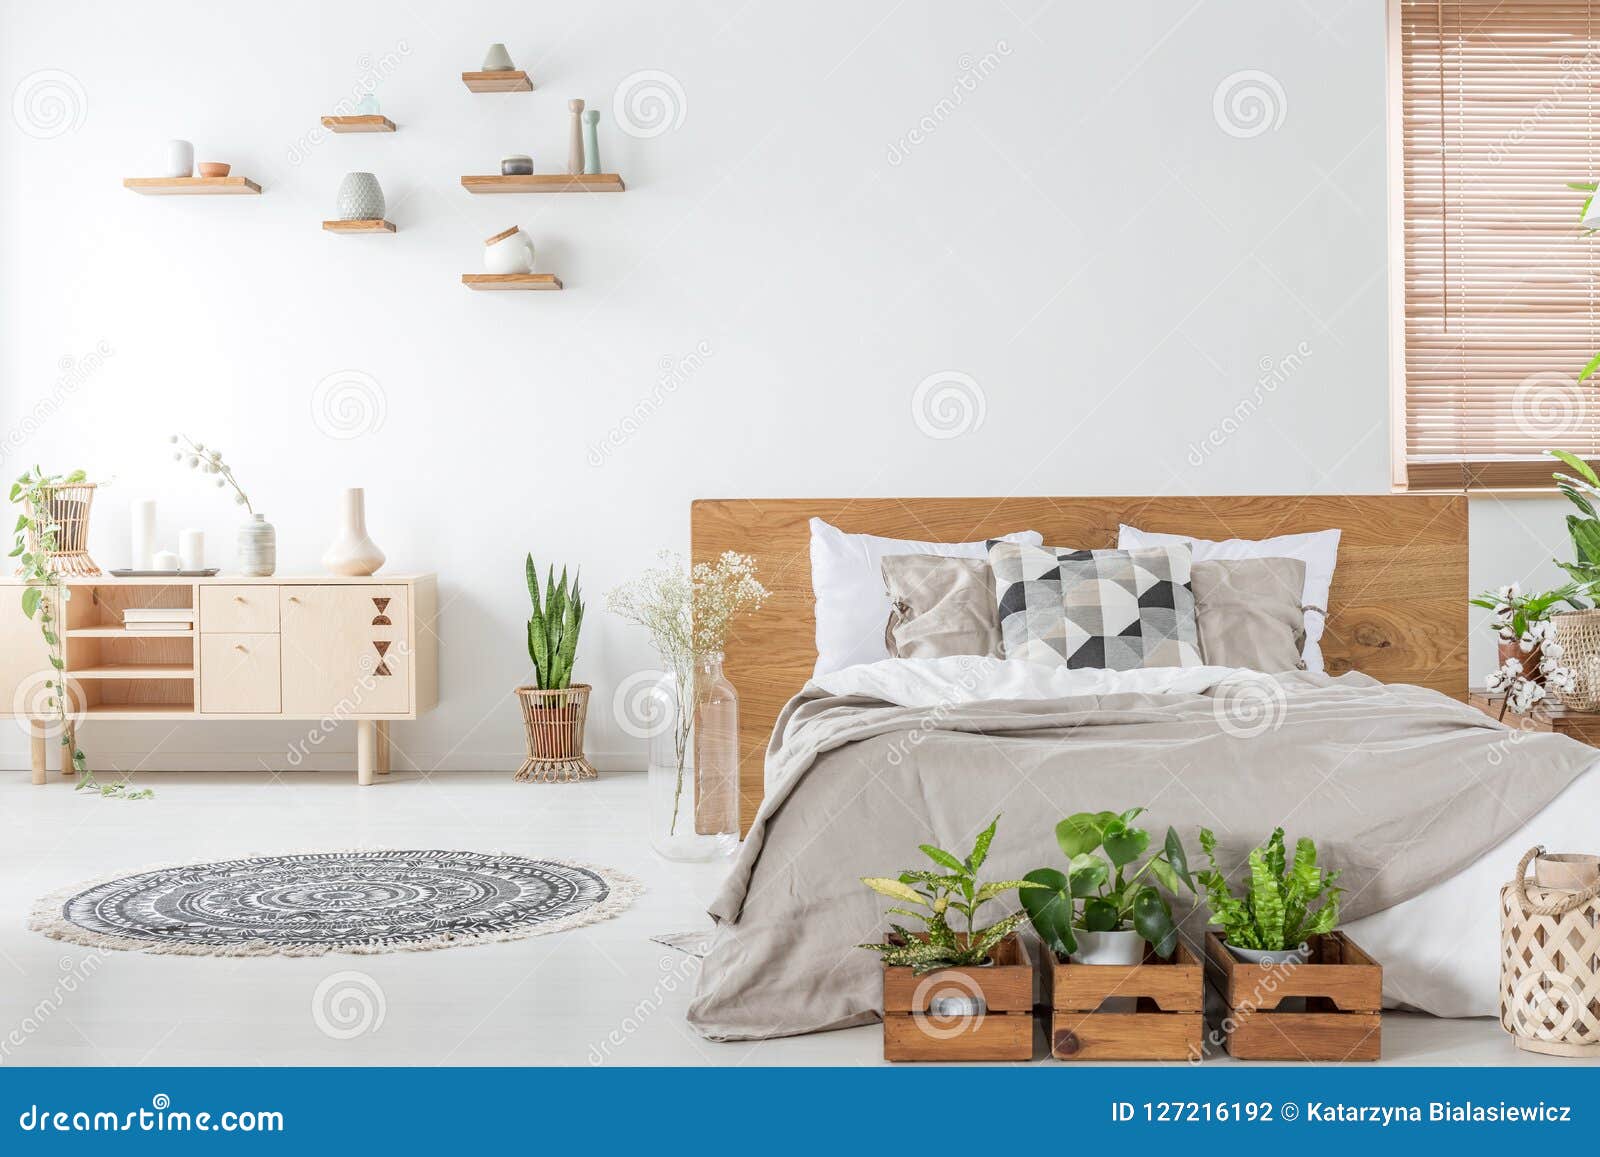 Plants In Front Of Wooden Bed In White Bedroom Interior With Rug